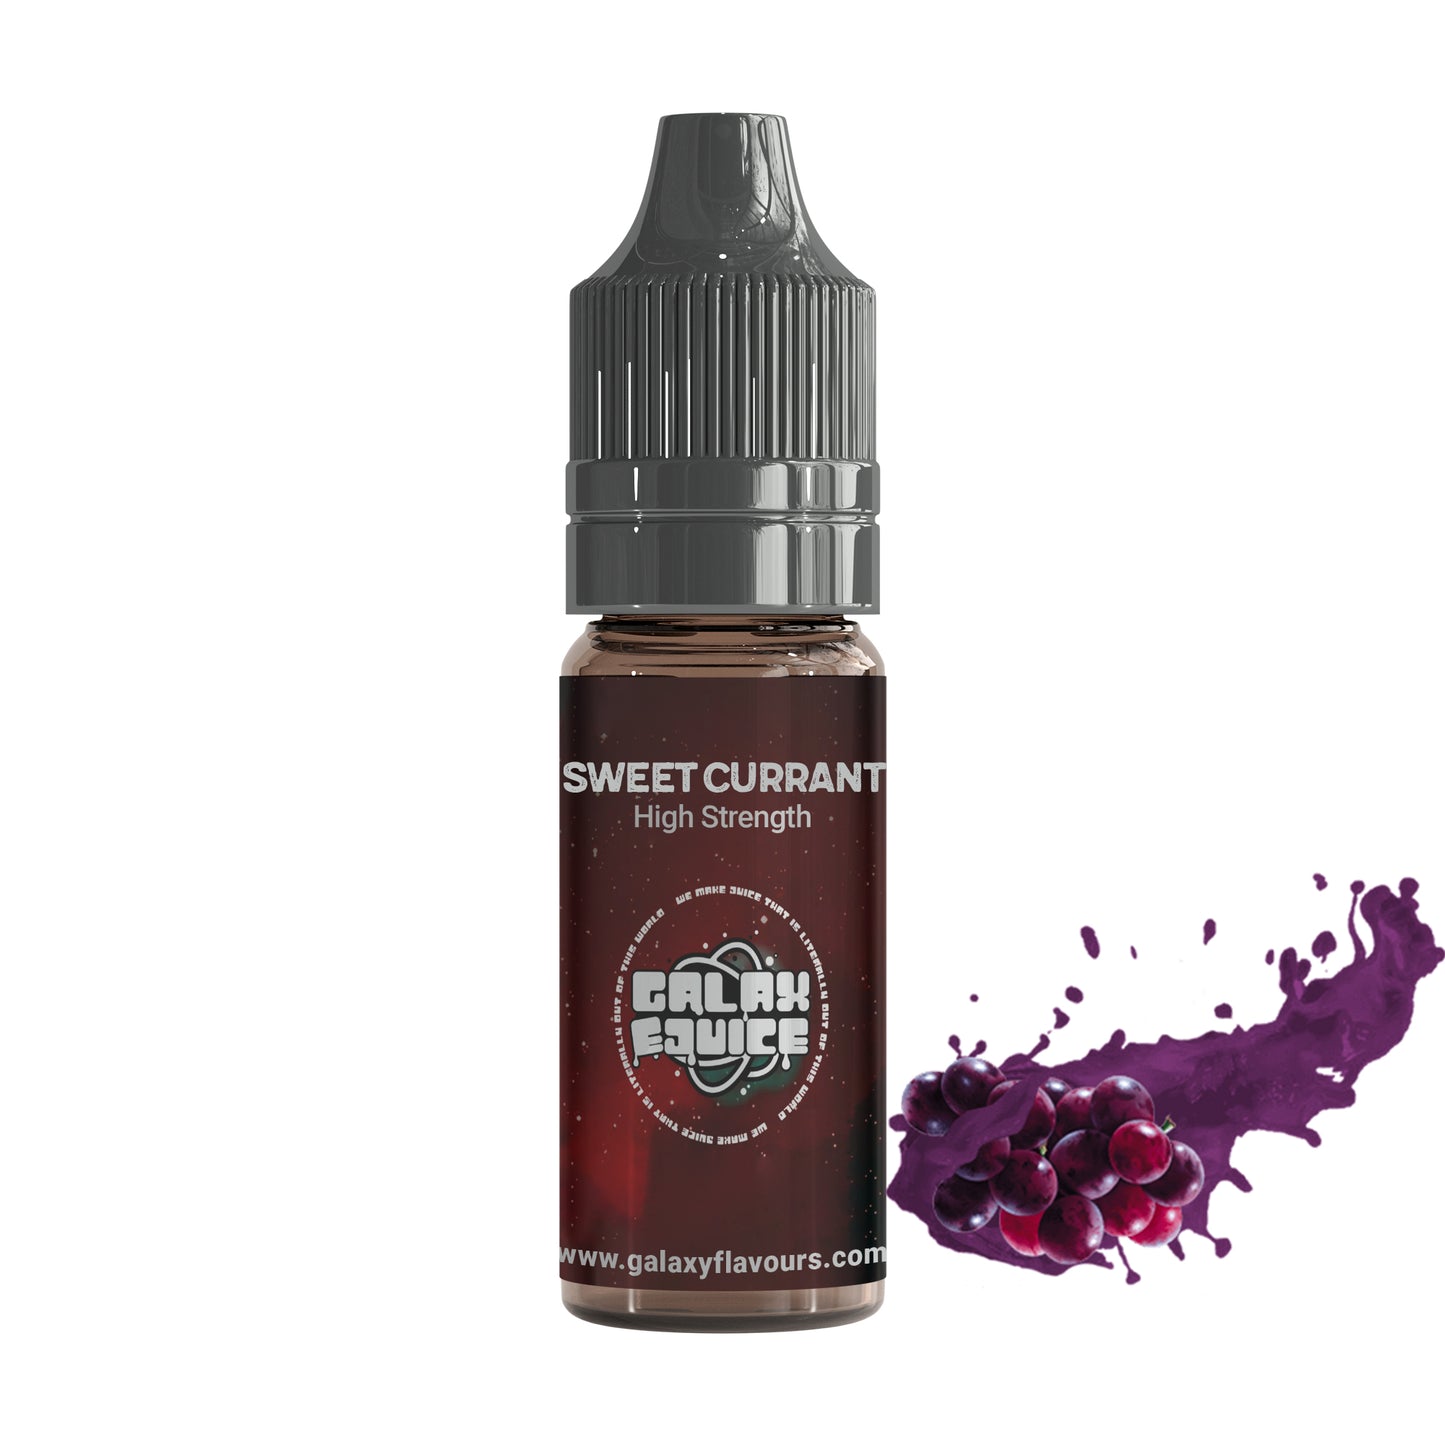 Sweet Currant High Strength Professional Flavouring.